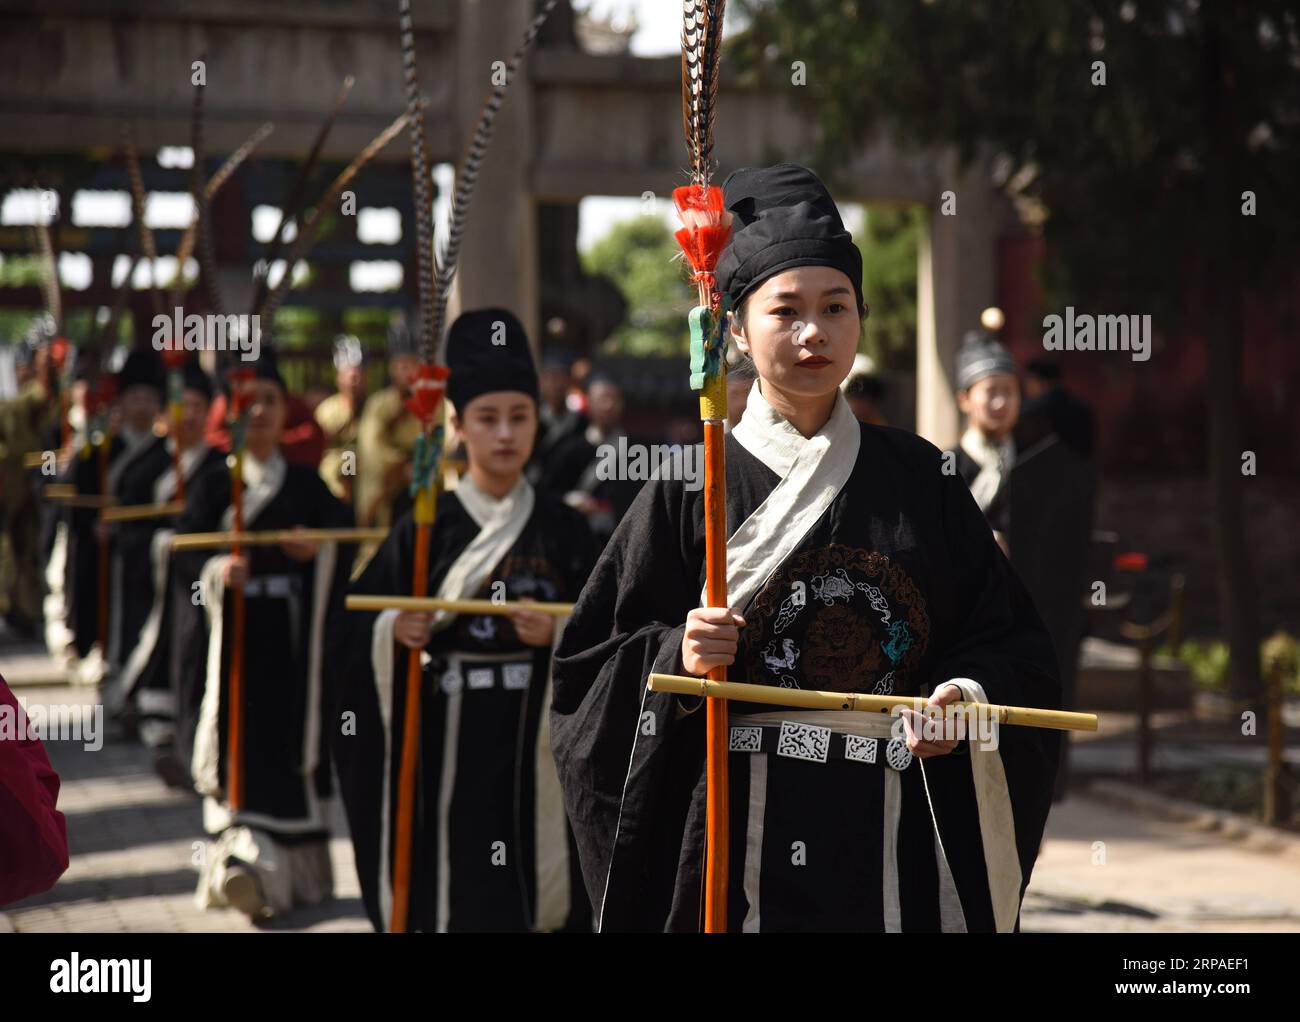 (190506) -- ZOUCHENG, May 6, 2019 (Xinhua) -- People perform during a commemoration ceremony of ancient China s philosopher Mencius and Mencius mother in Zoucheng City, east China s Shandong Province, May 6, 2019. Mencius (372-289 BC), or Meng Zi, was a pupil of Confucius grandson, and traveled his life teaching Confucianism. (Xinhua/Wang Kai) CHINA-SHANDONG-ZOUCHENG-MENCIUS-COMMEMORATION (CN) PUBLICATIONxNOTxINxCHN Stock Photo